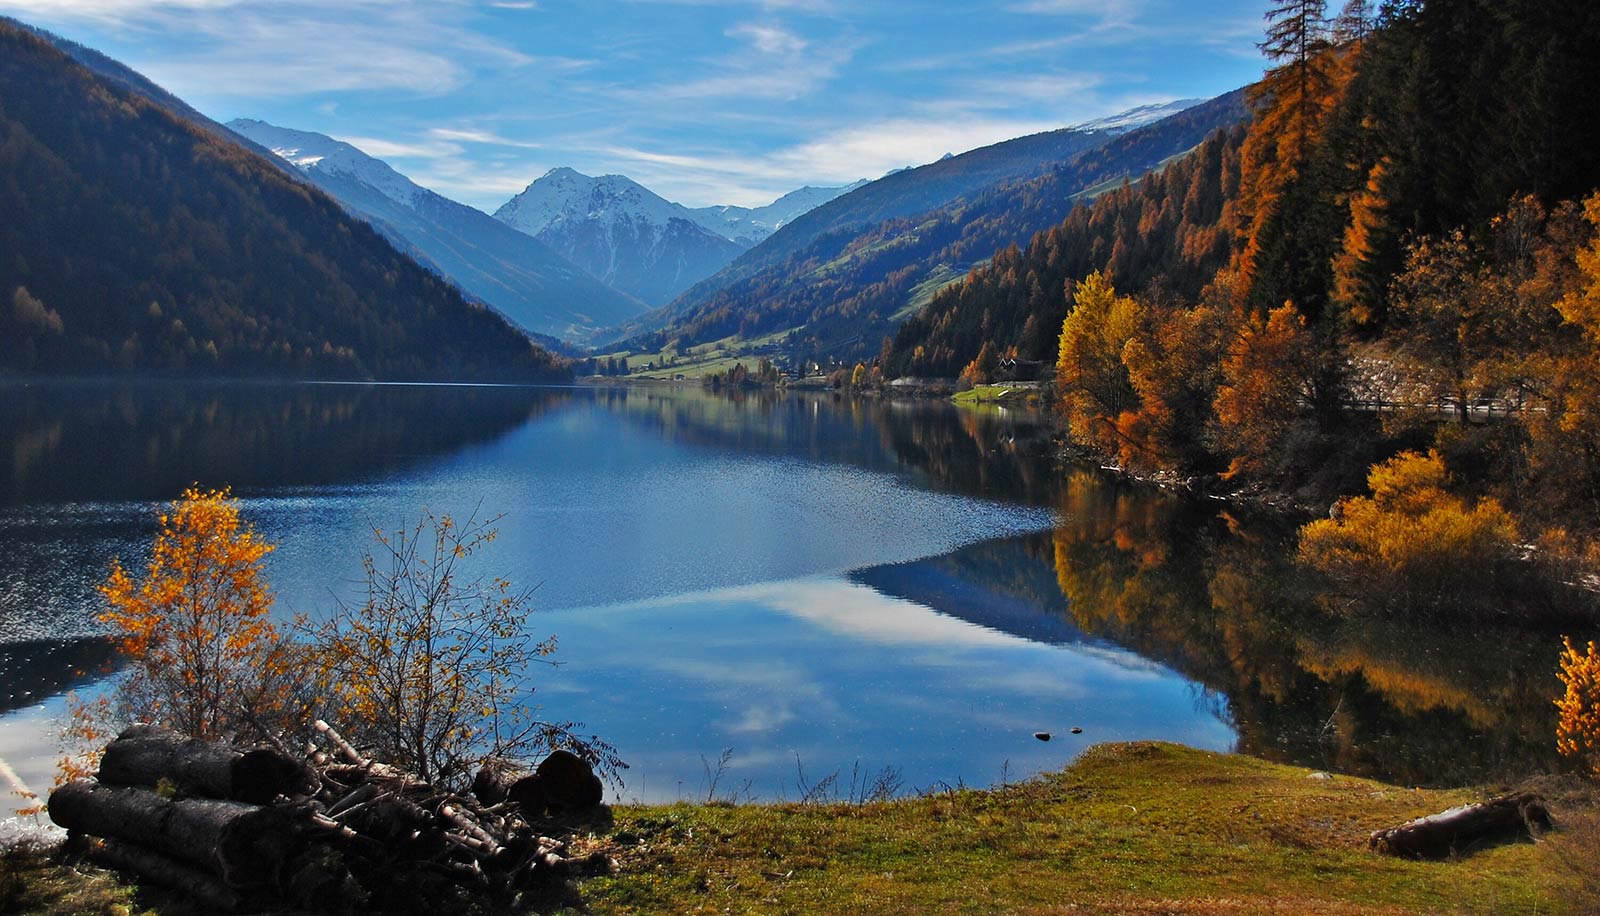 Zoggler Stausee-Lago di Zoccolo in Ultental-Val d'Ultimo on an autumn day with snowy mountains in the background